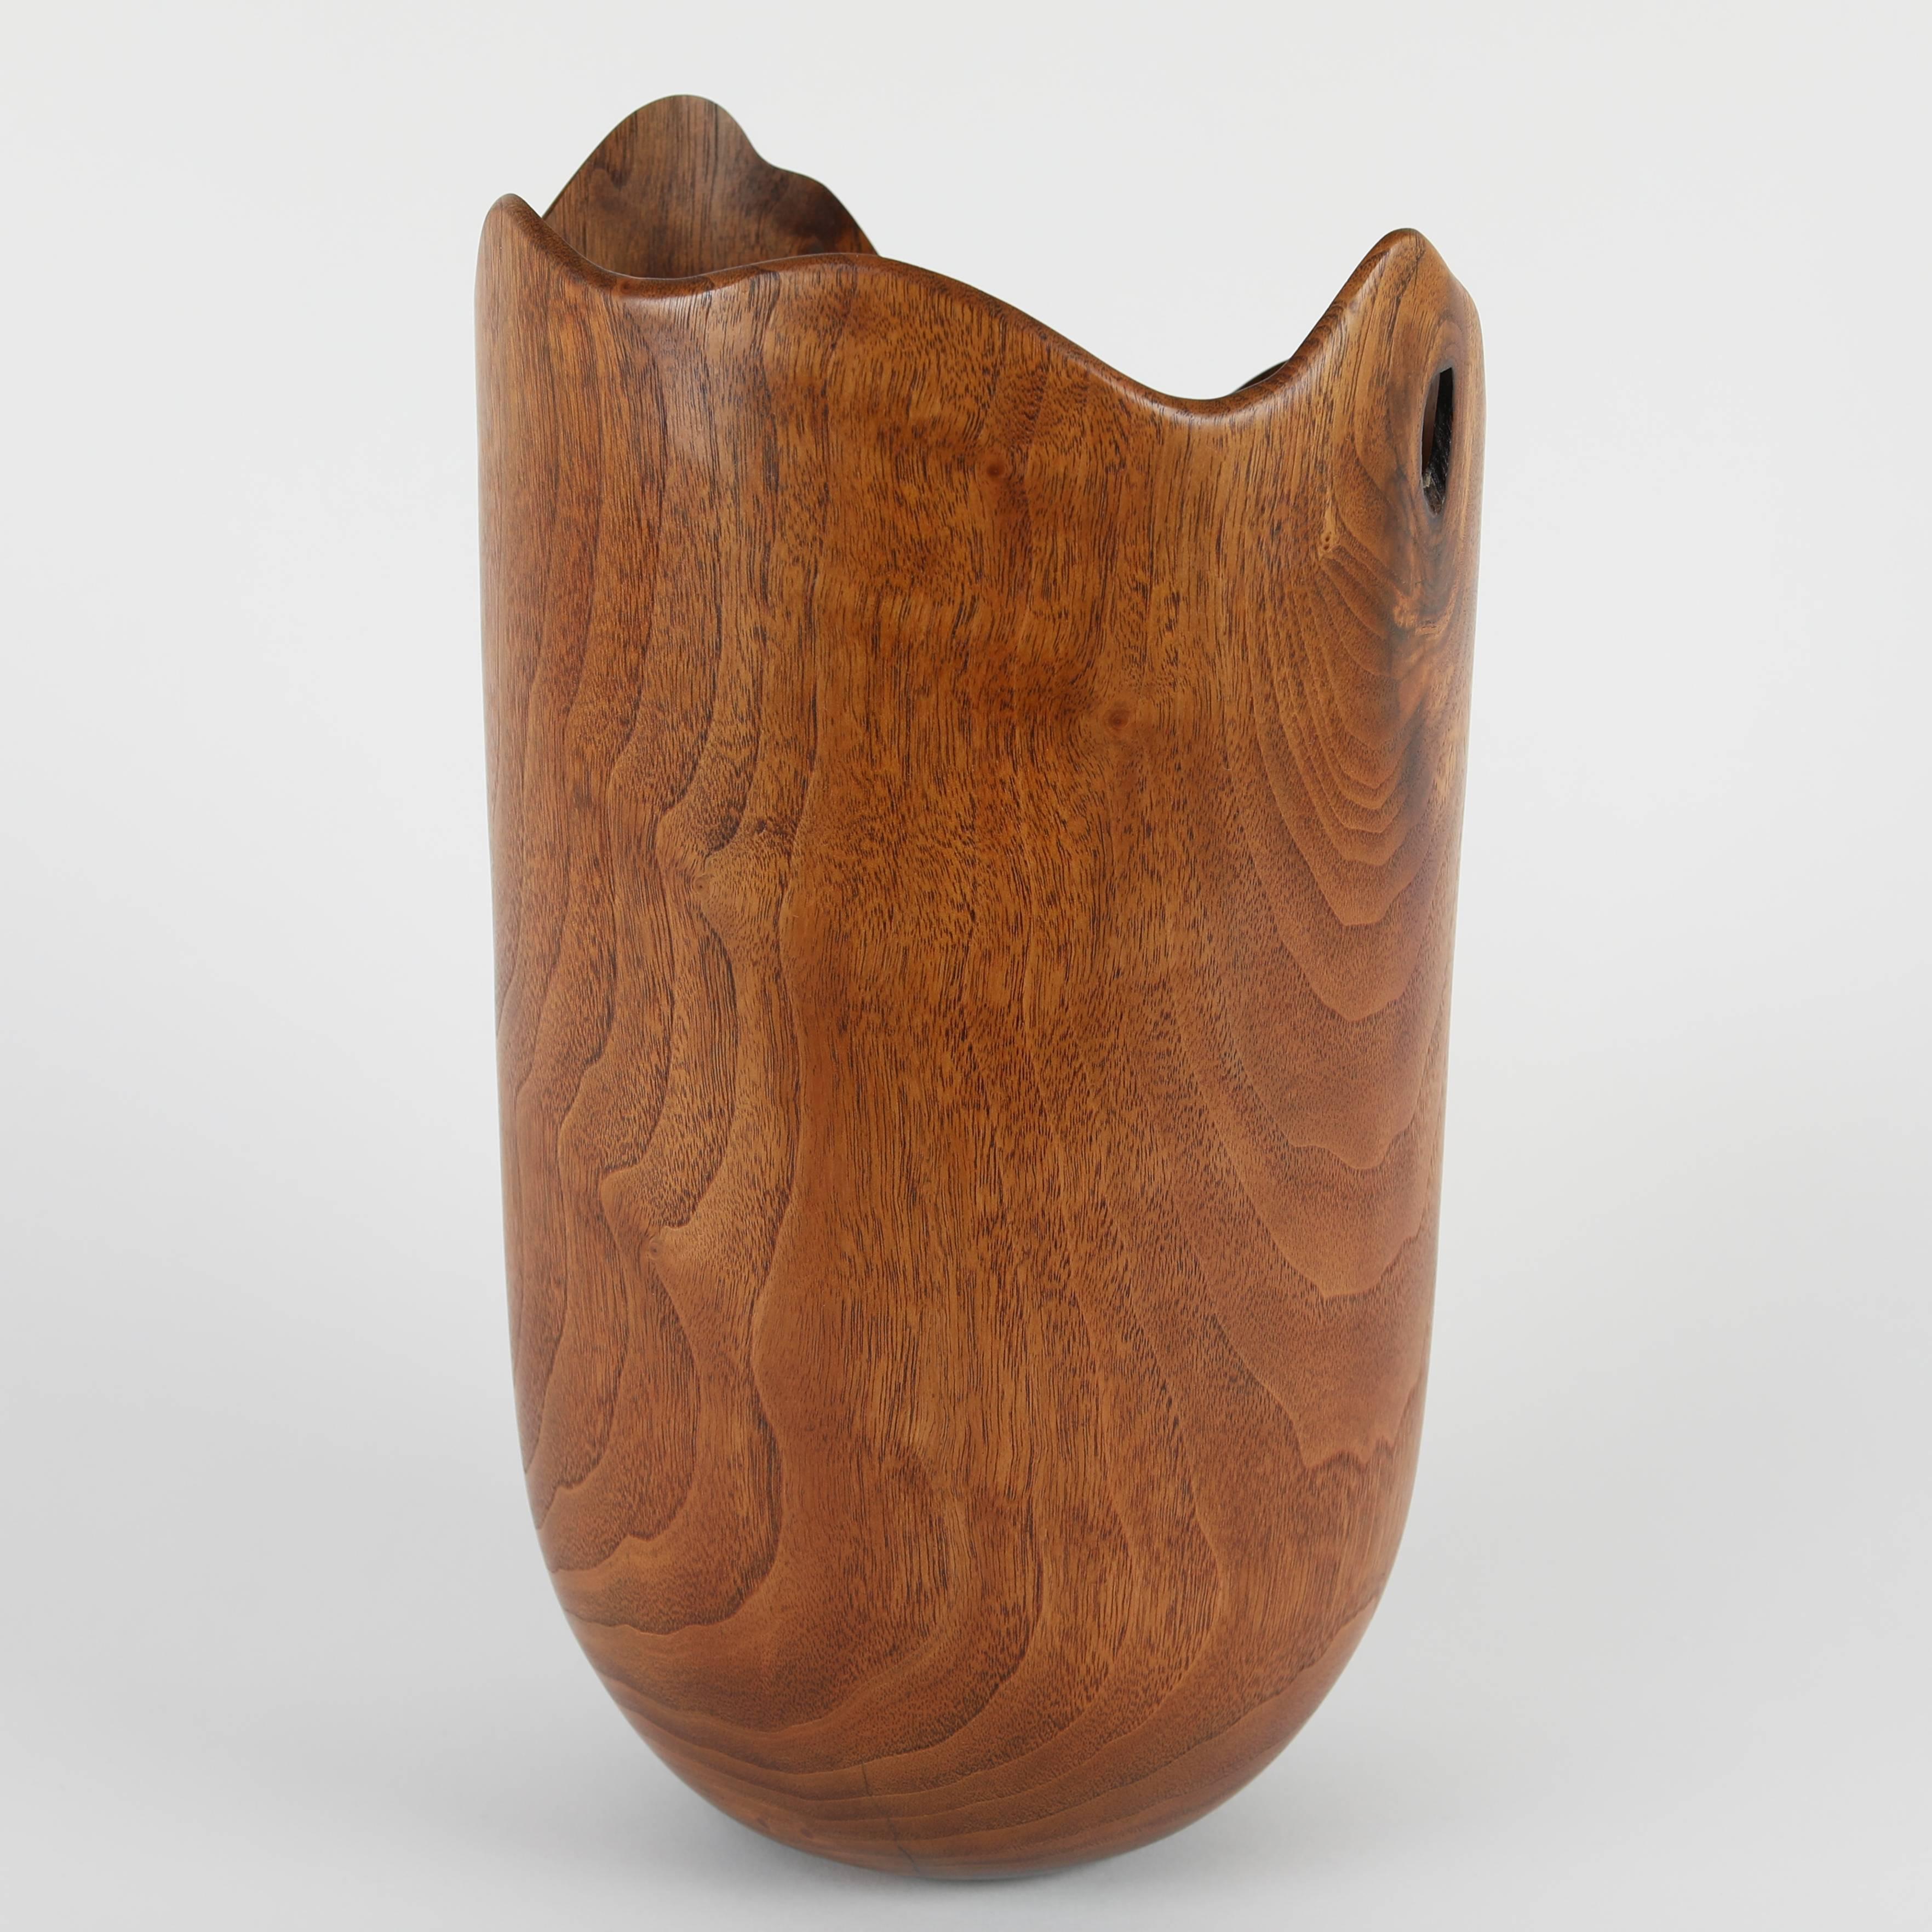 Late 20th Century Turned Walnut Vase with Free-Form Top by Mike Kornblum